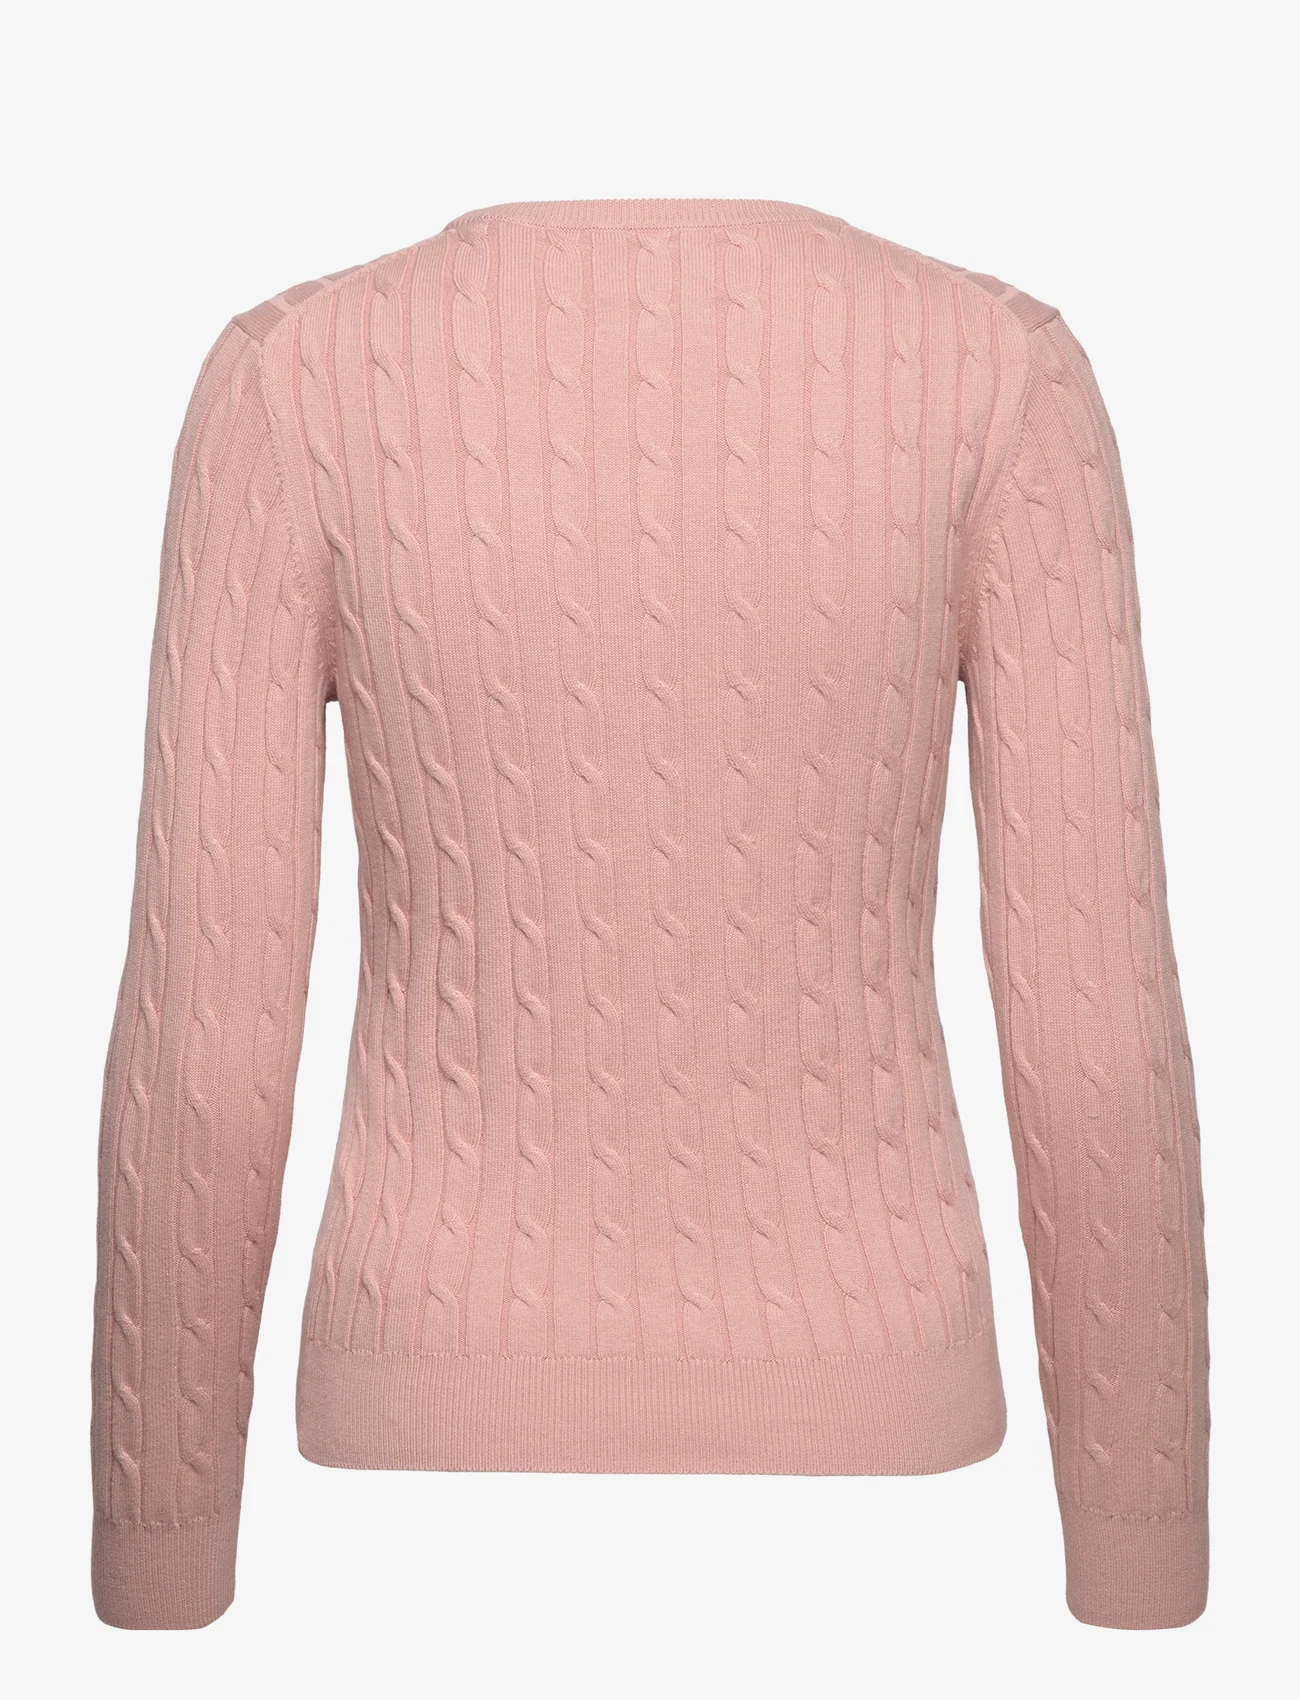 GANT - STRETCH COTTON CABLE C-NECK - pullover - dusty rose - 1